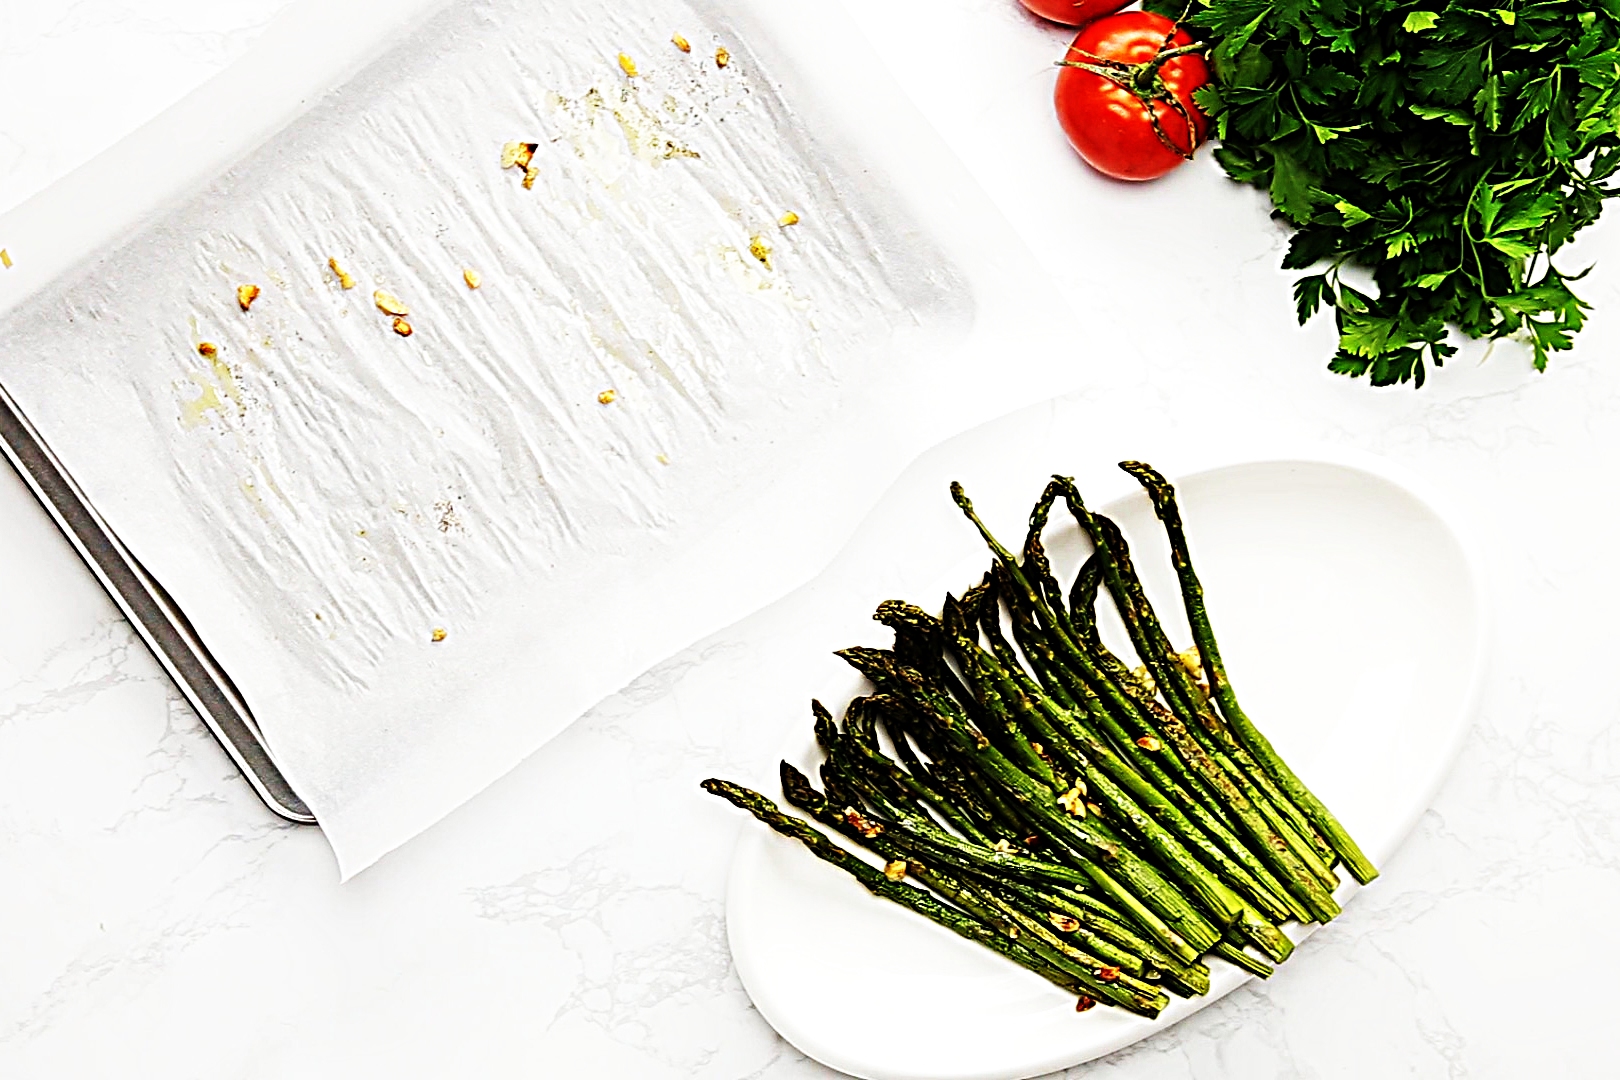 Stupid-Easy Recipe for 5-Ingredient Garlic Roasted Asparagus (#1 Top-Rated)